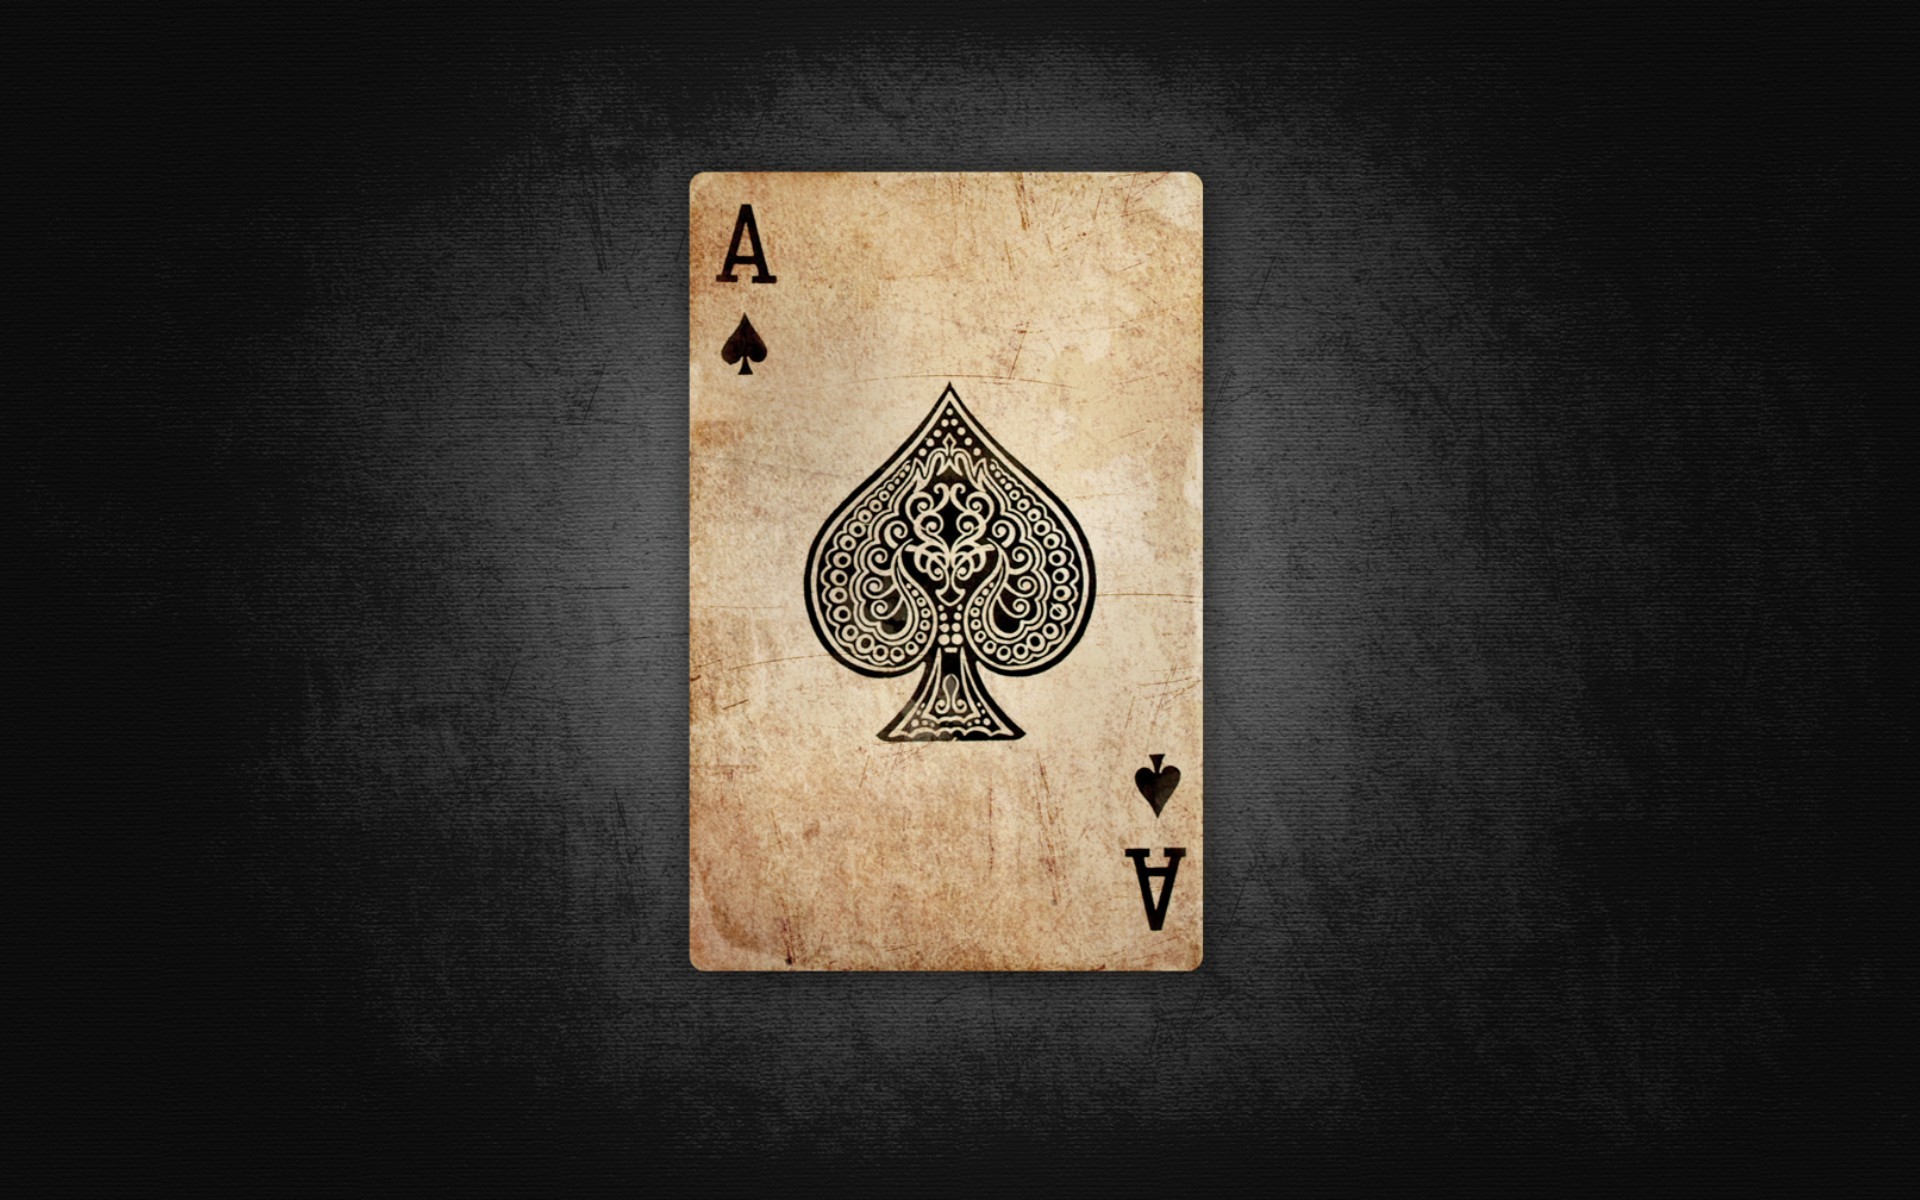 1920x1200 Free Ace of Spades Wallpapers, Free Ace of Spades HD Wallpapers, Ace .